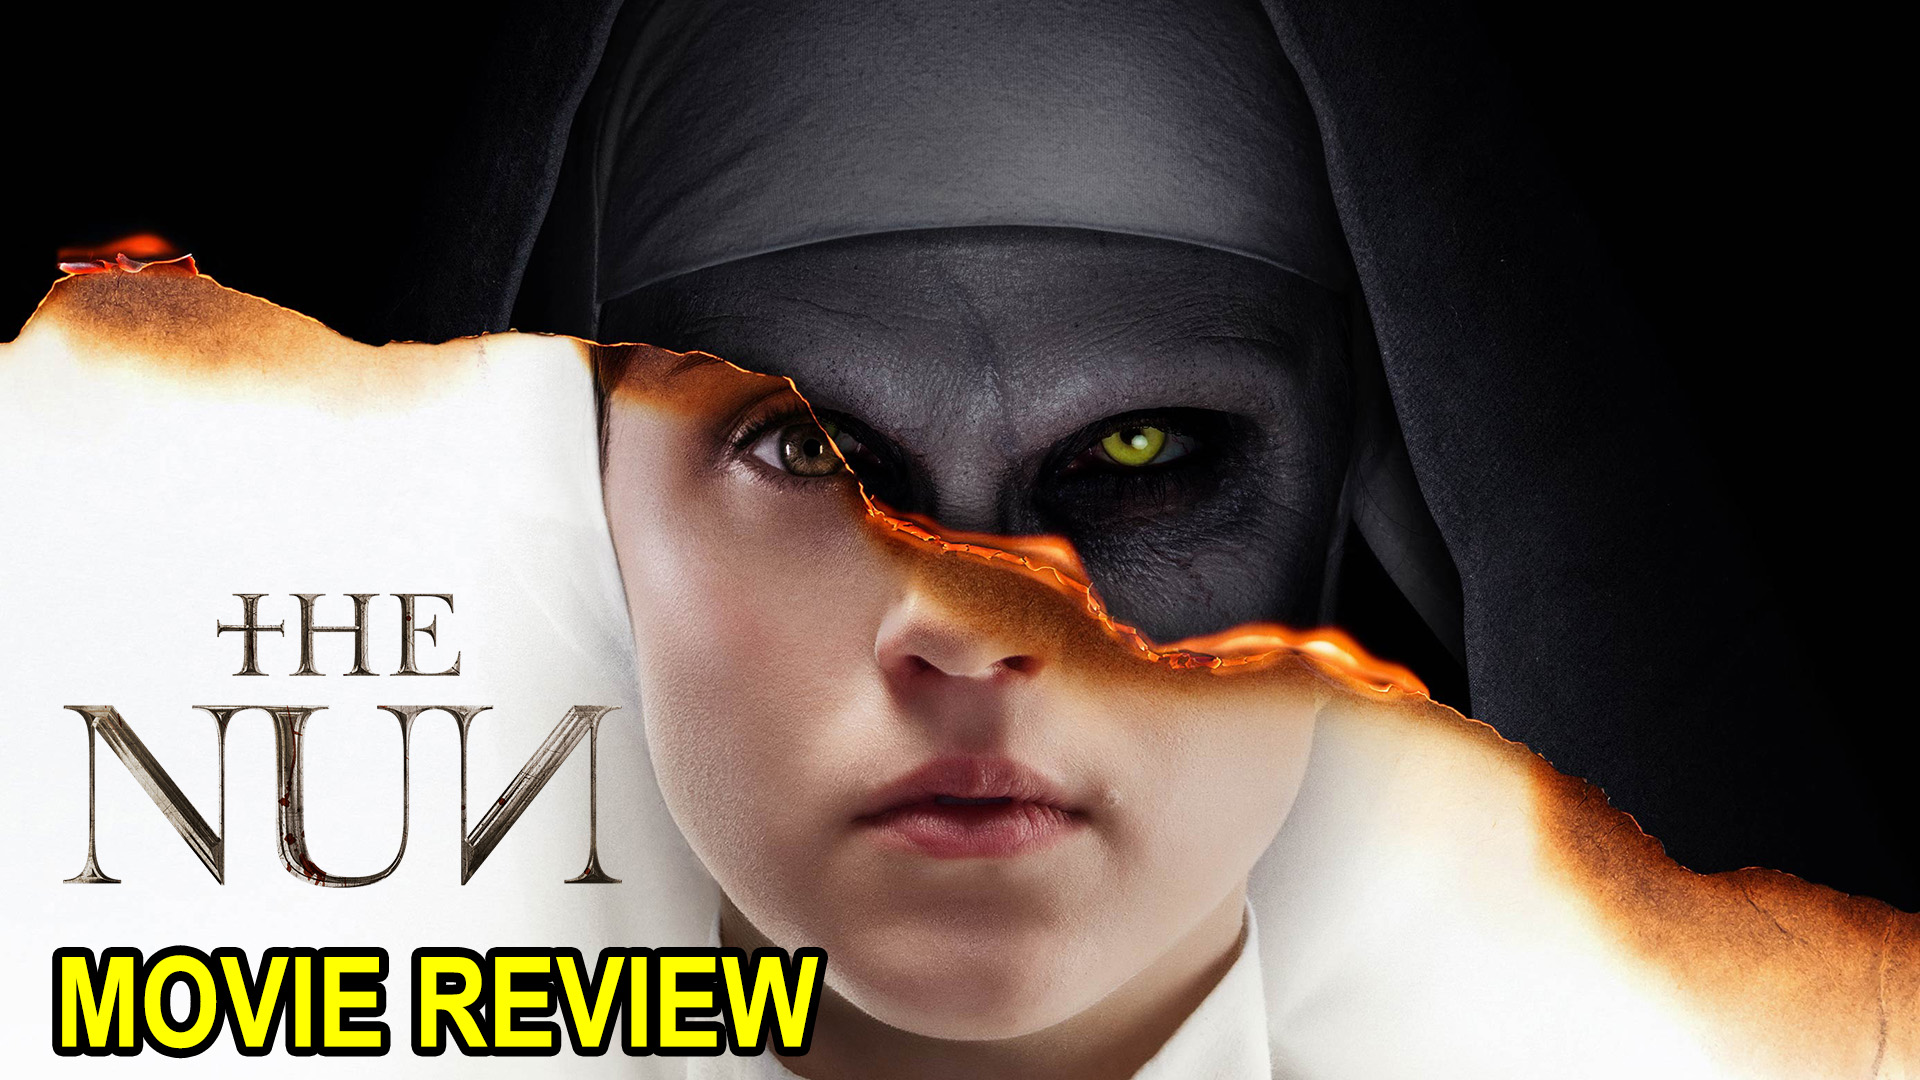 The Nun – Movie Review